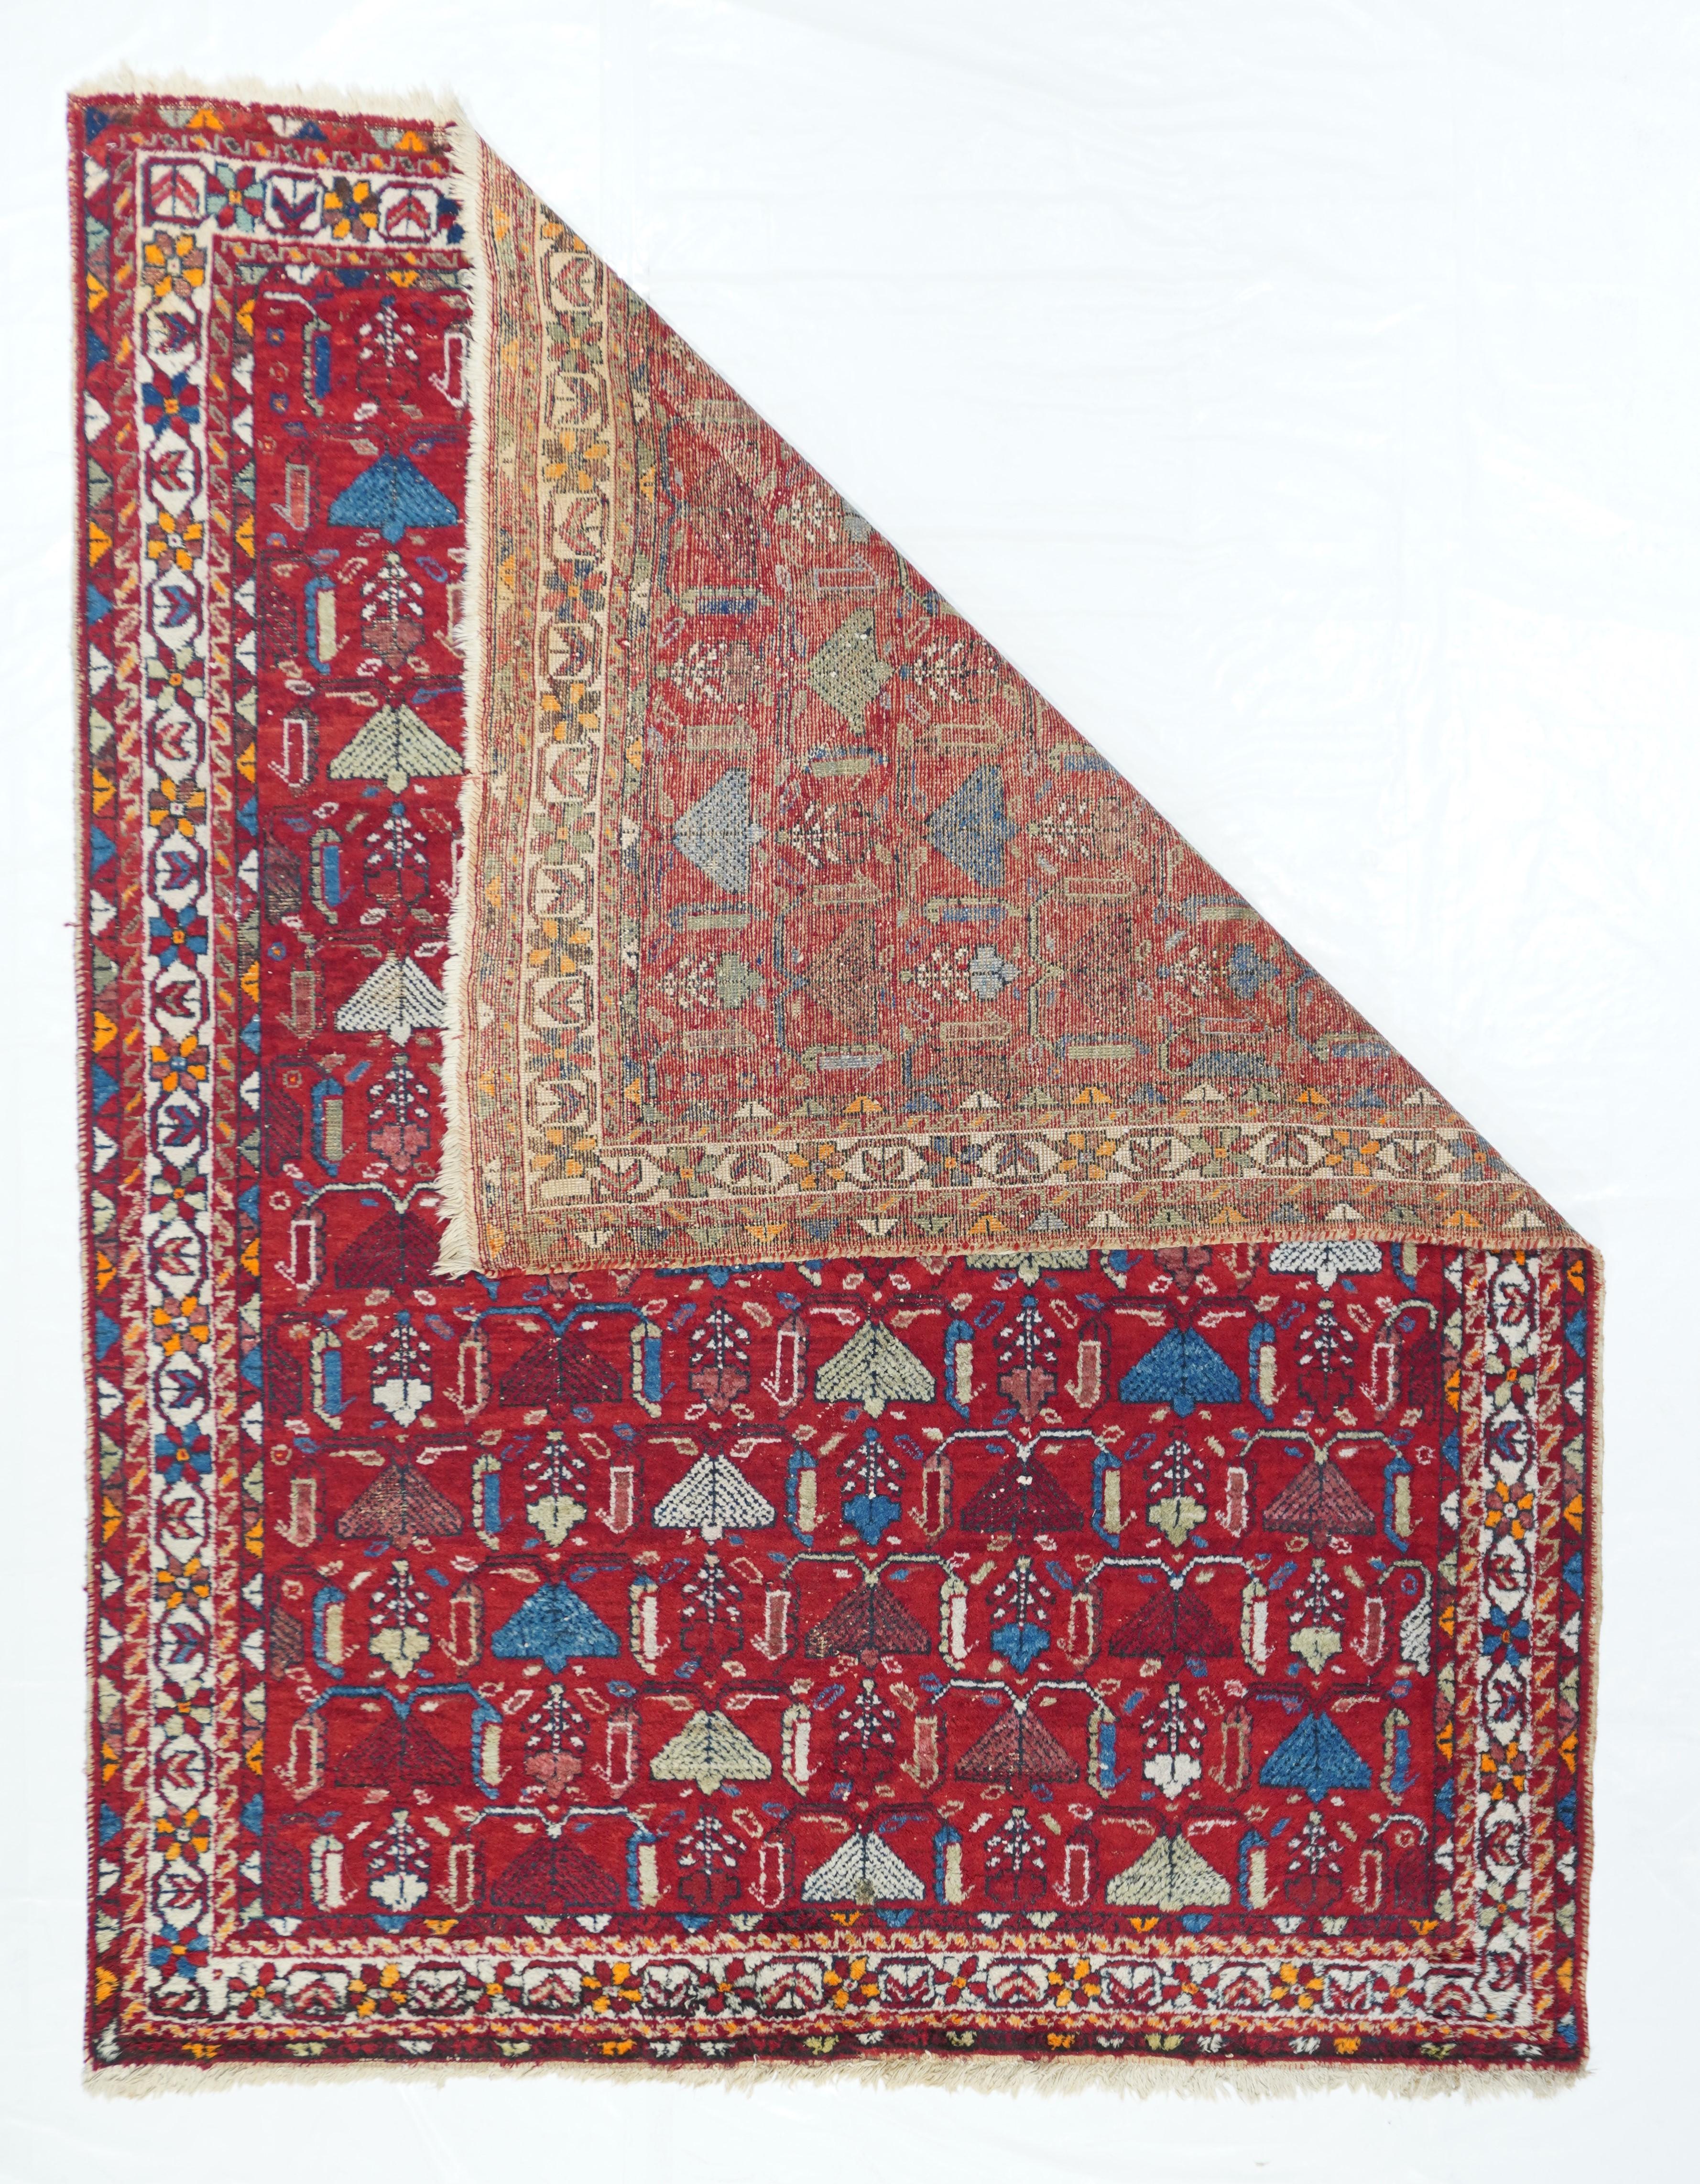 Antique Afshar rug 5' x 6'5''. Thirteen rows of broad tailed peacocks in straw, sand, deep red and medium blue, with flowers between individual birds, run across and up the red field of this tribal SW Persian scatter. Small orange details. Narrow